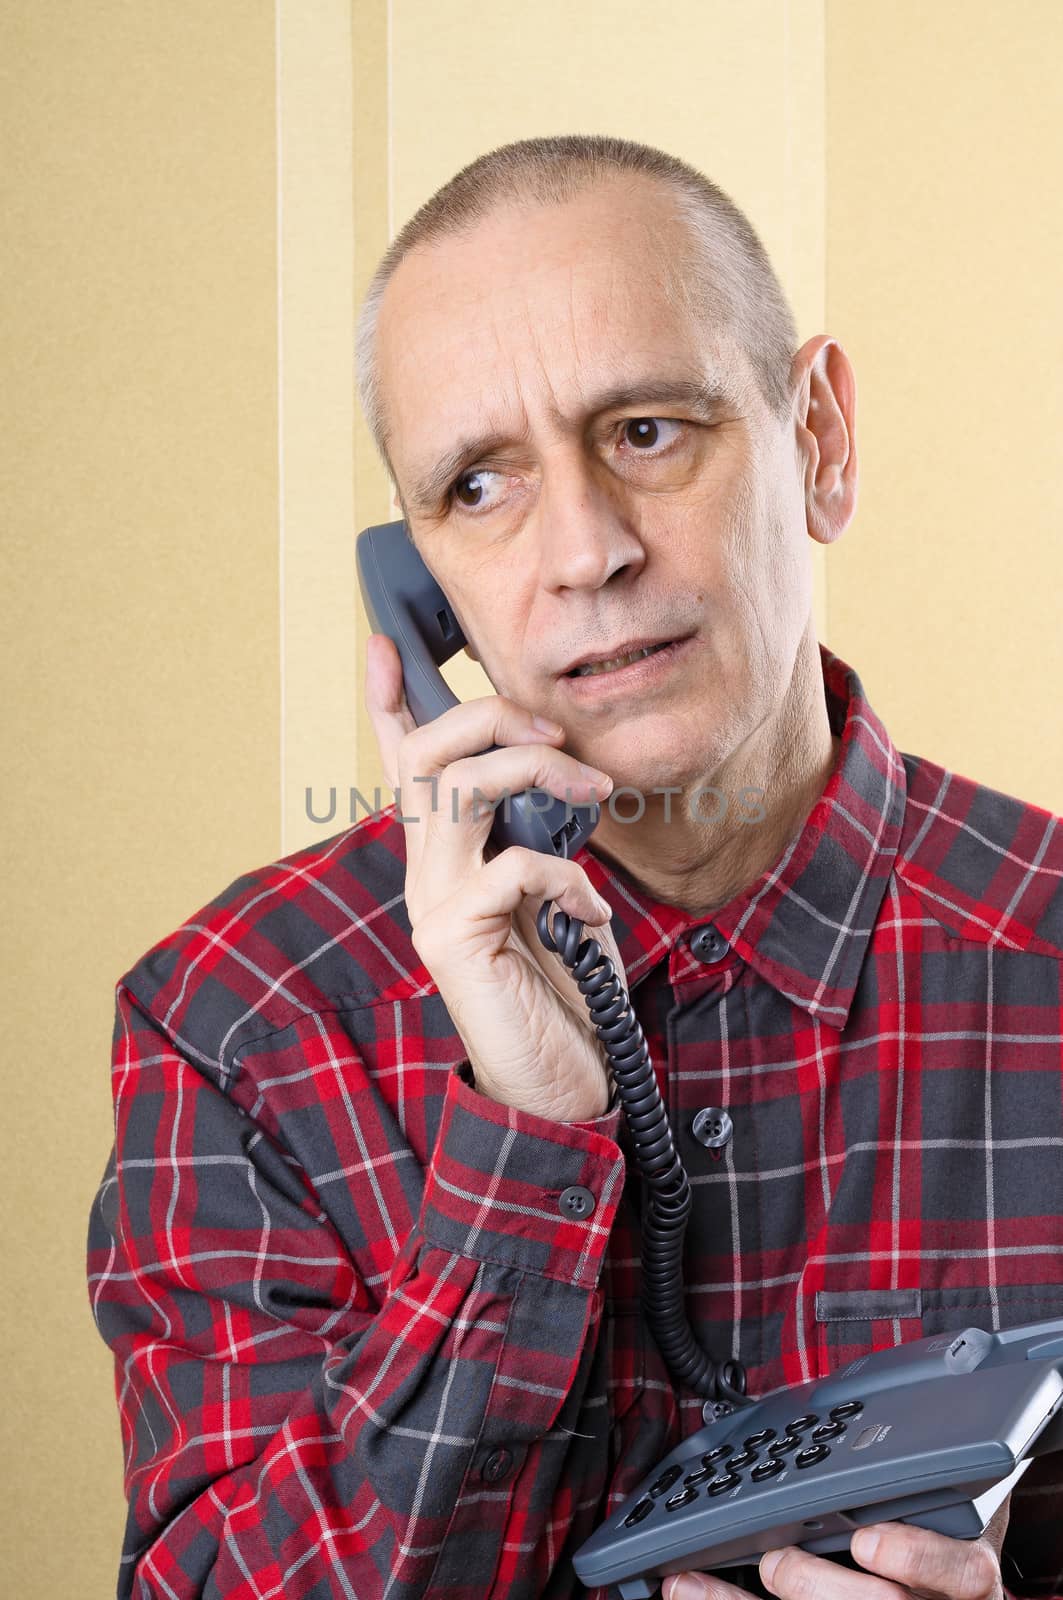 Troubled man speaking about problems on phone